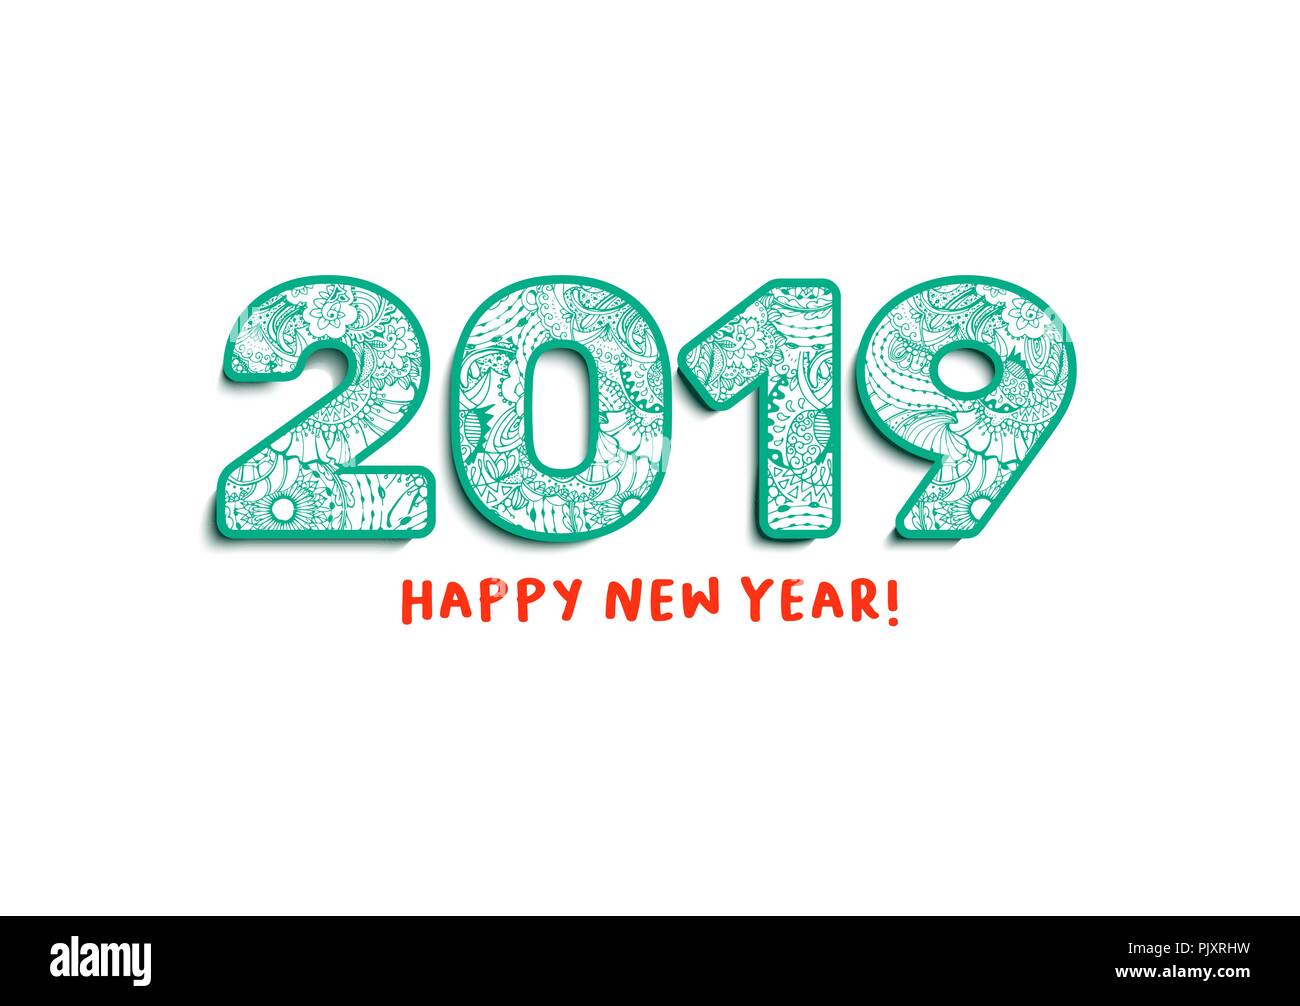 2019 Lettering, Happy New Year Greeting. Calendar Front Cover, Horizontal Slogan with Chinese Zodiac Xmas Holiday, Doodle Nombers with Green Ornament, Red Inscription. Notepad Isolated Print. Stock Vector